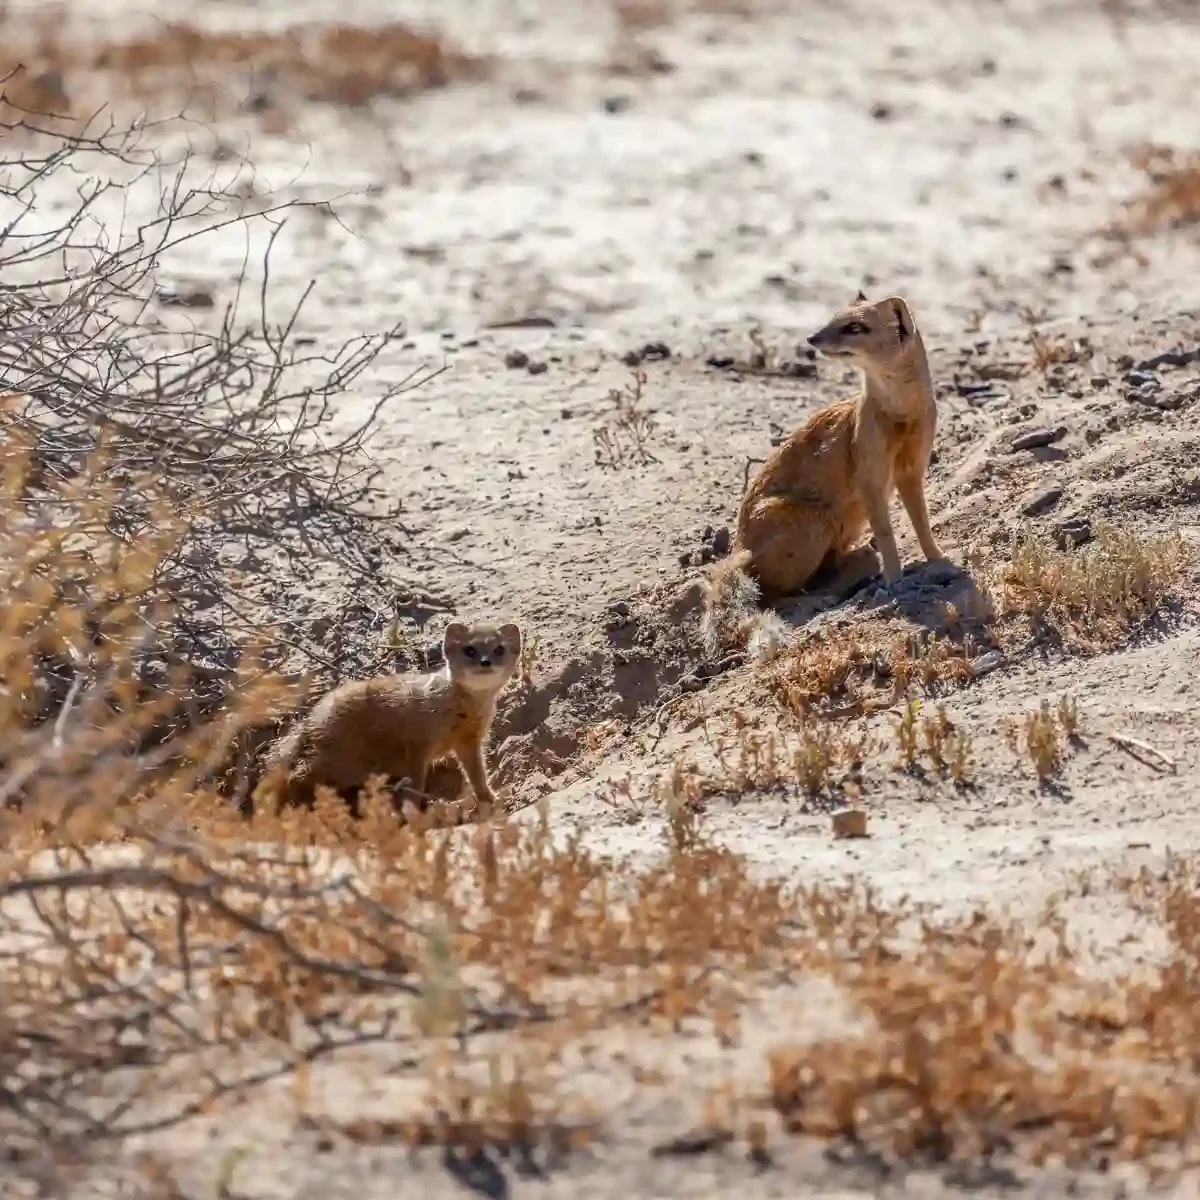 two yellow mongoose peaking out from their ground burrow, featured on Inverdoorn's wildlife gallery